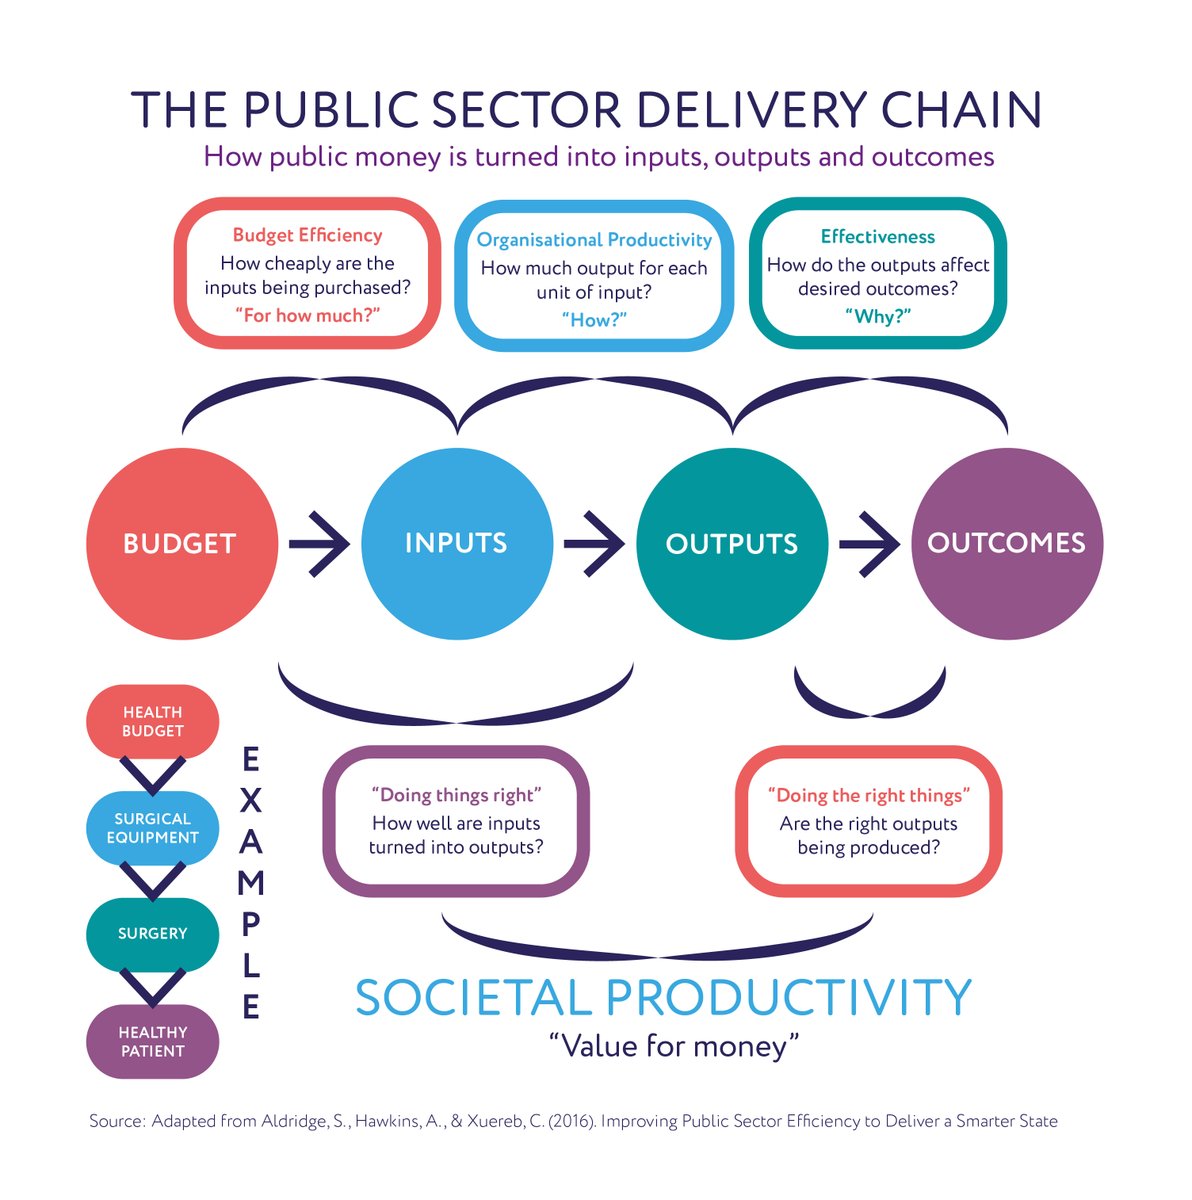 The public sector plays a critical role in the economy. But improving its productivity is about more than cost efficiency. Read @bart_ark, Joel Hoskins & @jorden_nina's #productivityagenda chapter on producing sustainable public sector productivity growth: productivity.ac.uk/research/the-p…